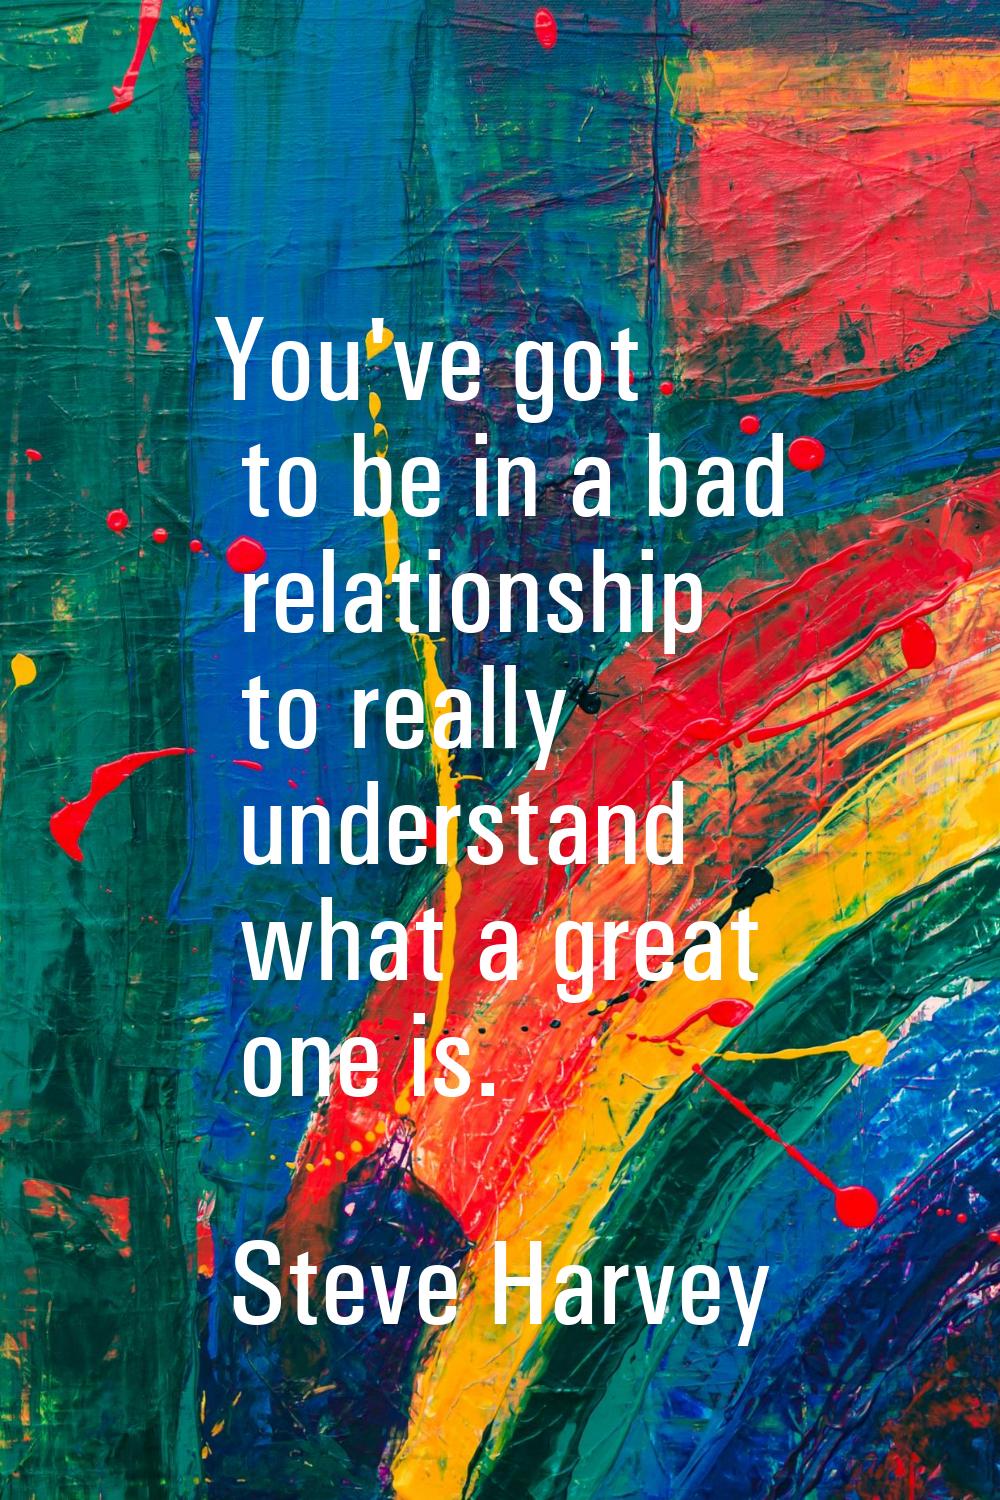 You've got to be in a bad relationship to really understand what a great one is.